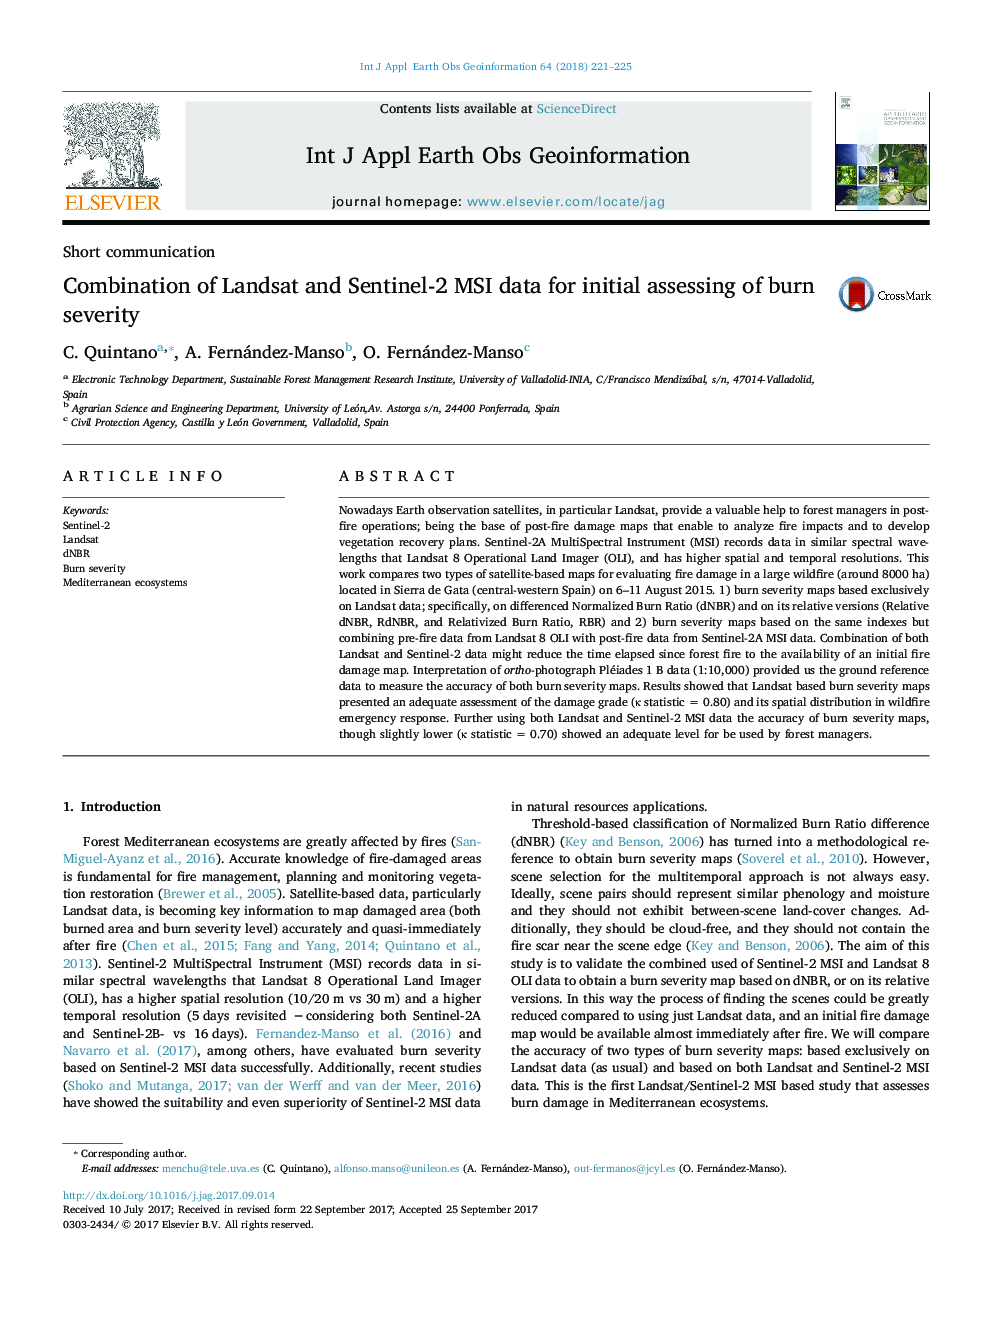 Combination of Landsat and Sentinel-2 MSI data for initial assessing of burn severity